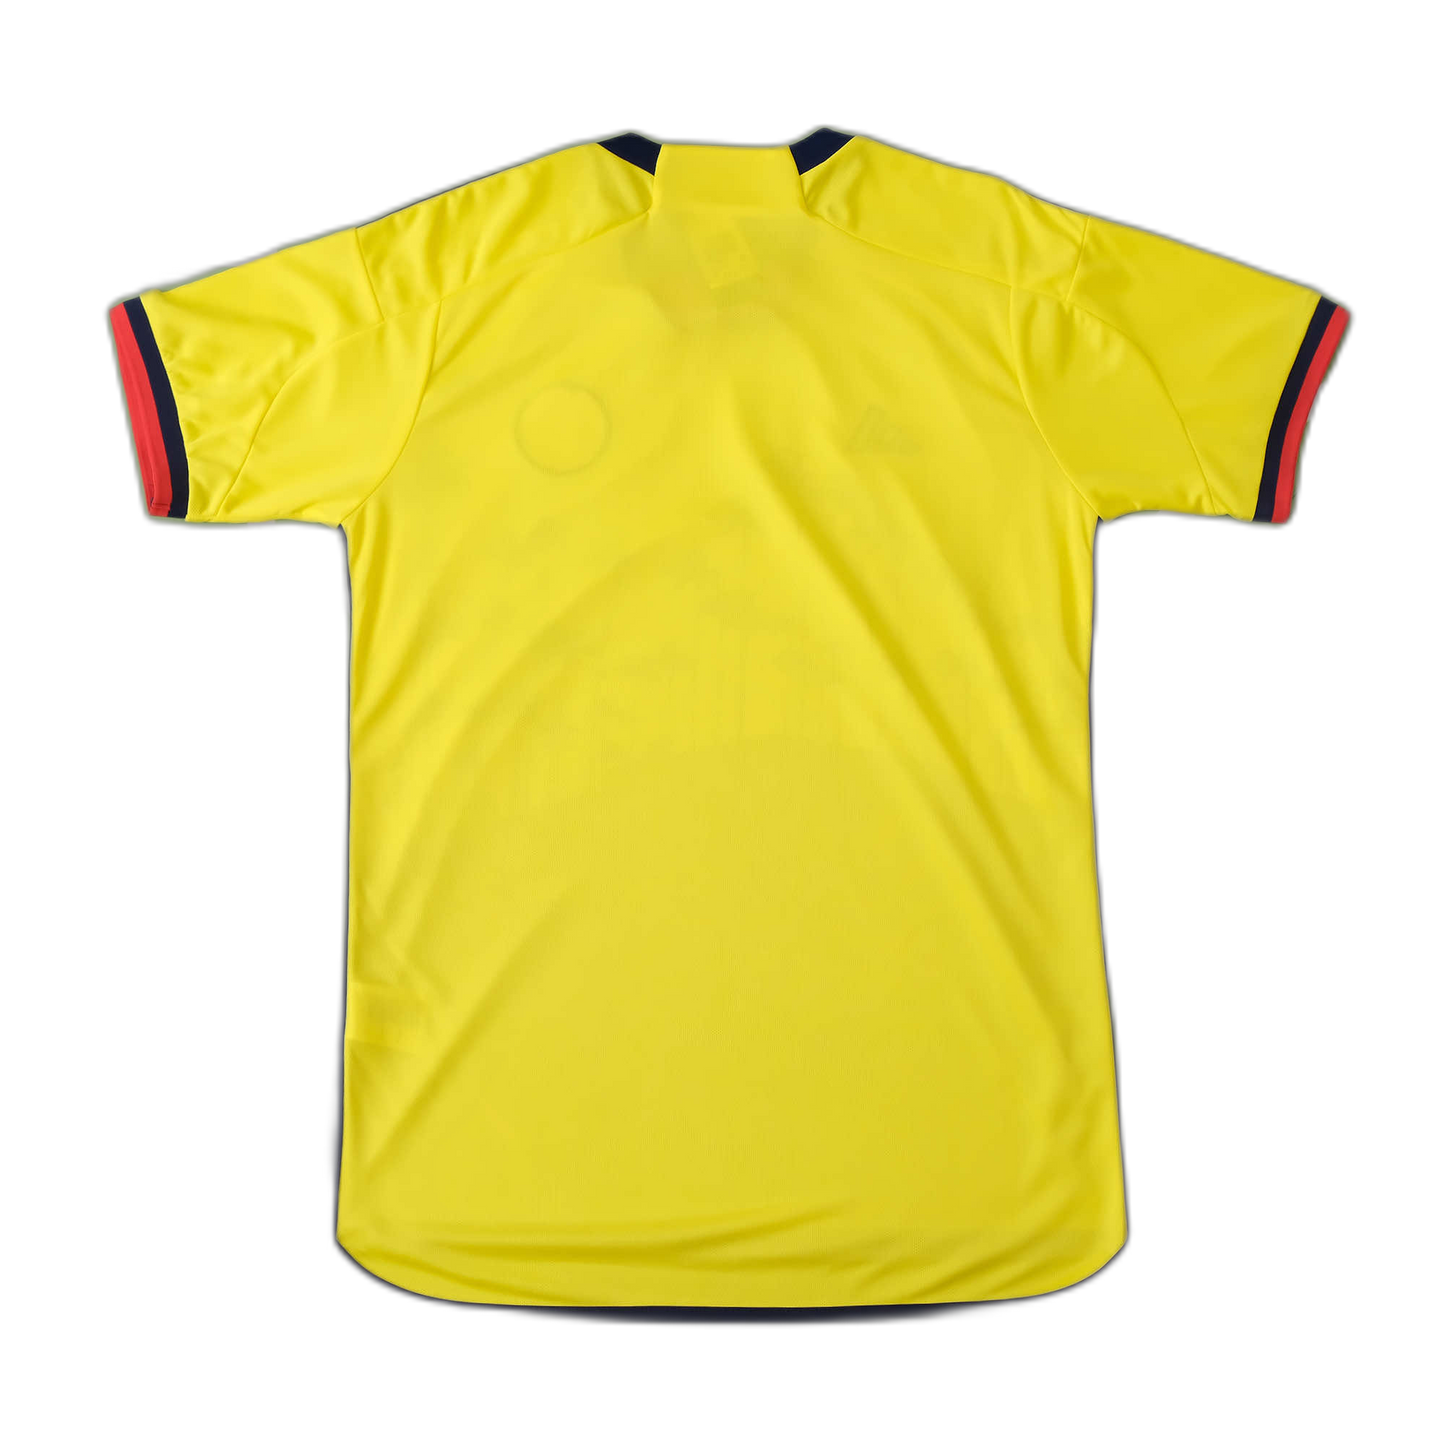 Columbia 23/24 Concept "Cocora Valley" Jersey